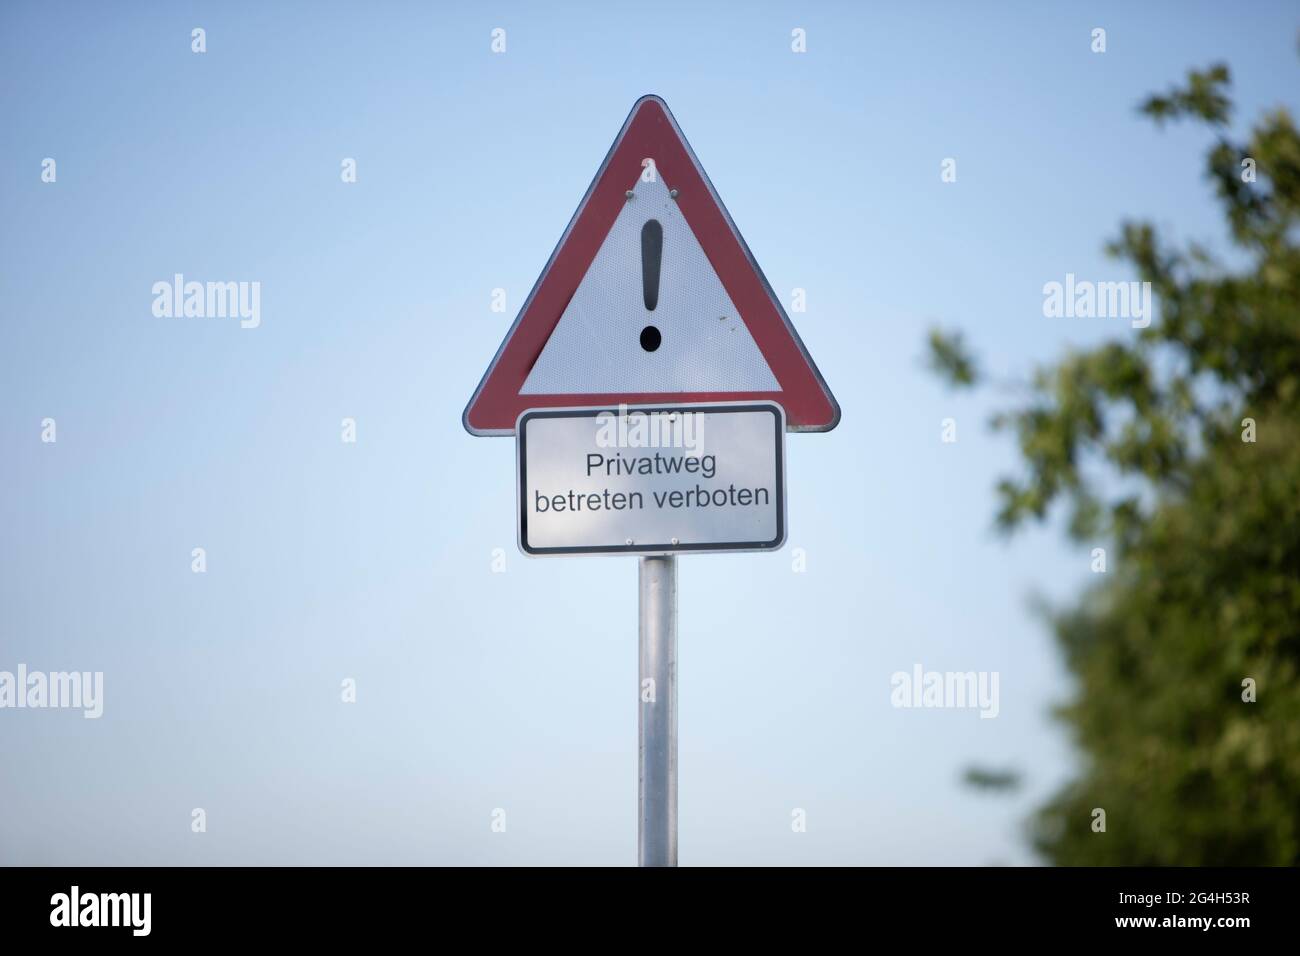 german sign, caution private way, no passing allowed Stock Photo